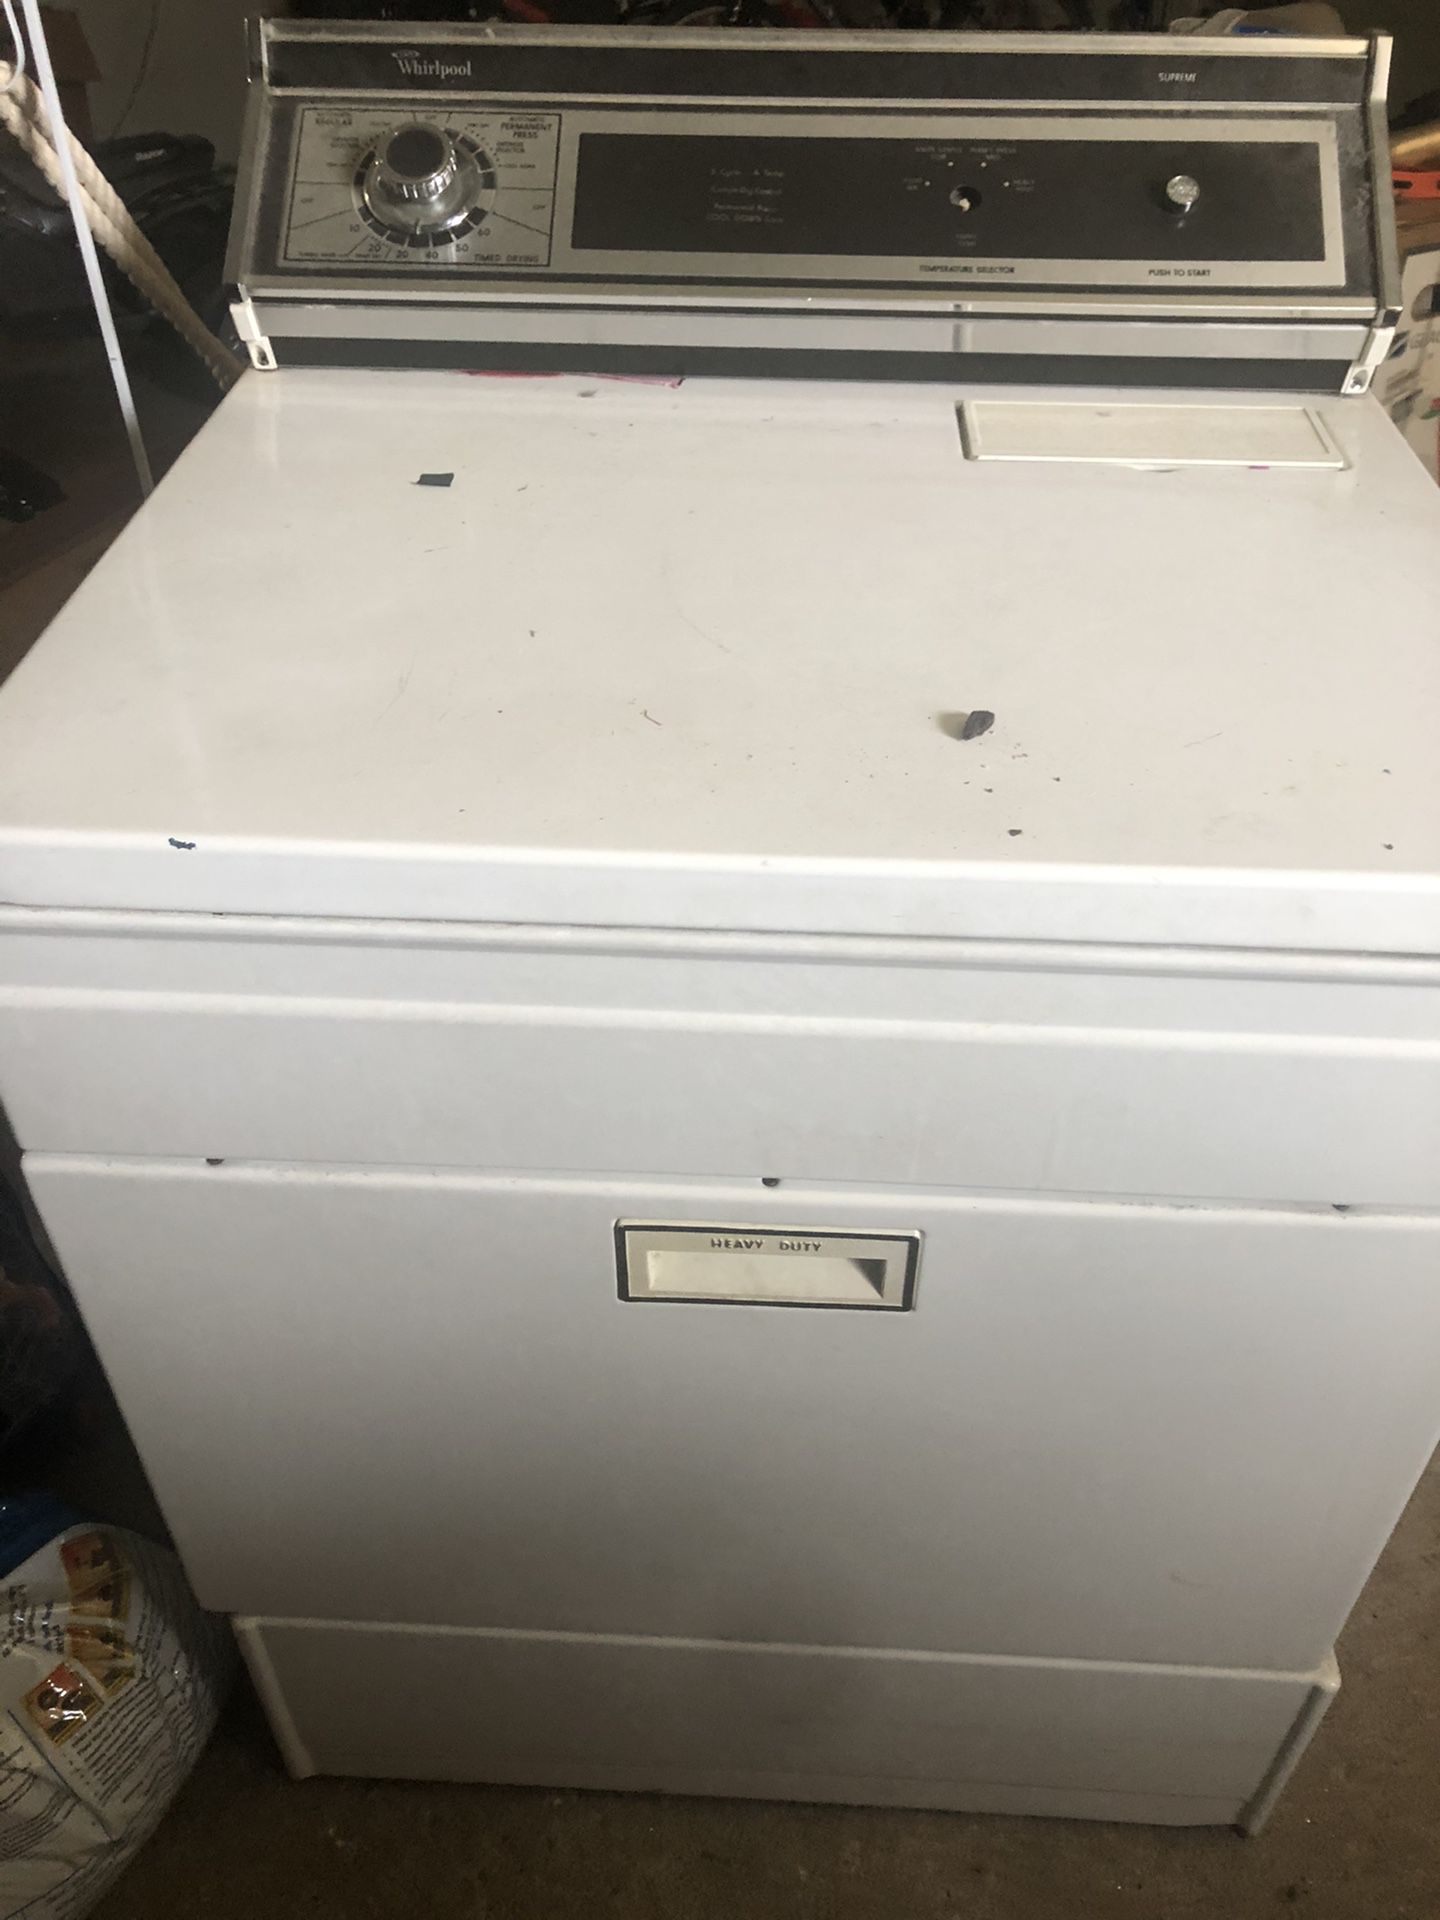 Free electric dryer